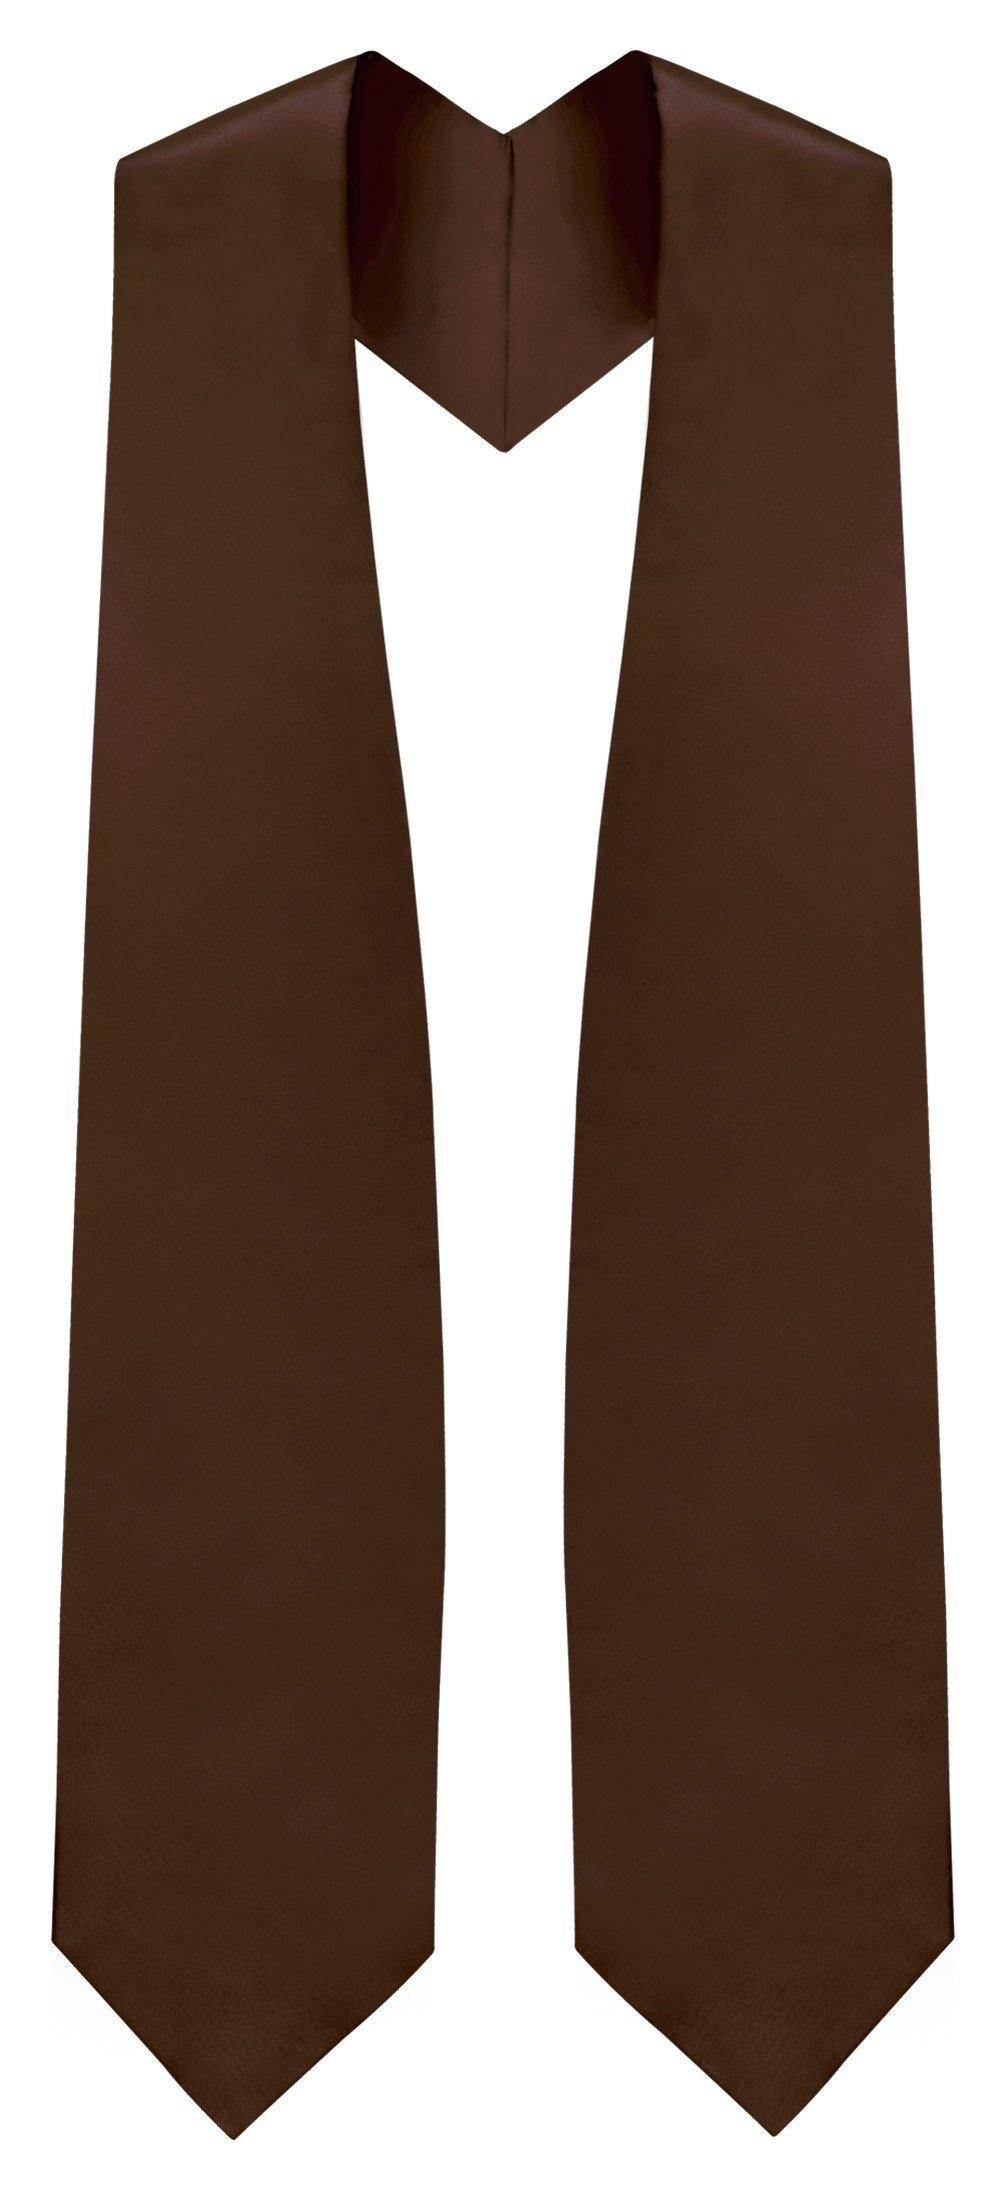 Brown Graduation Stole - Brown College & High School Stoles - Graduation Cap and Gown